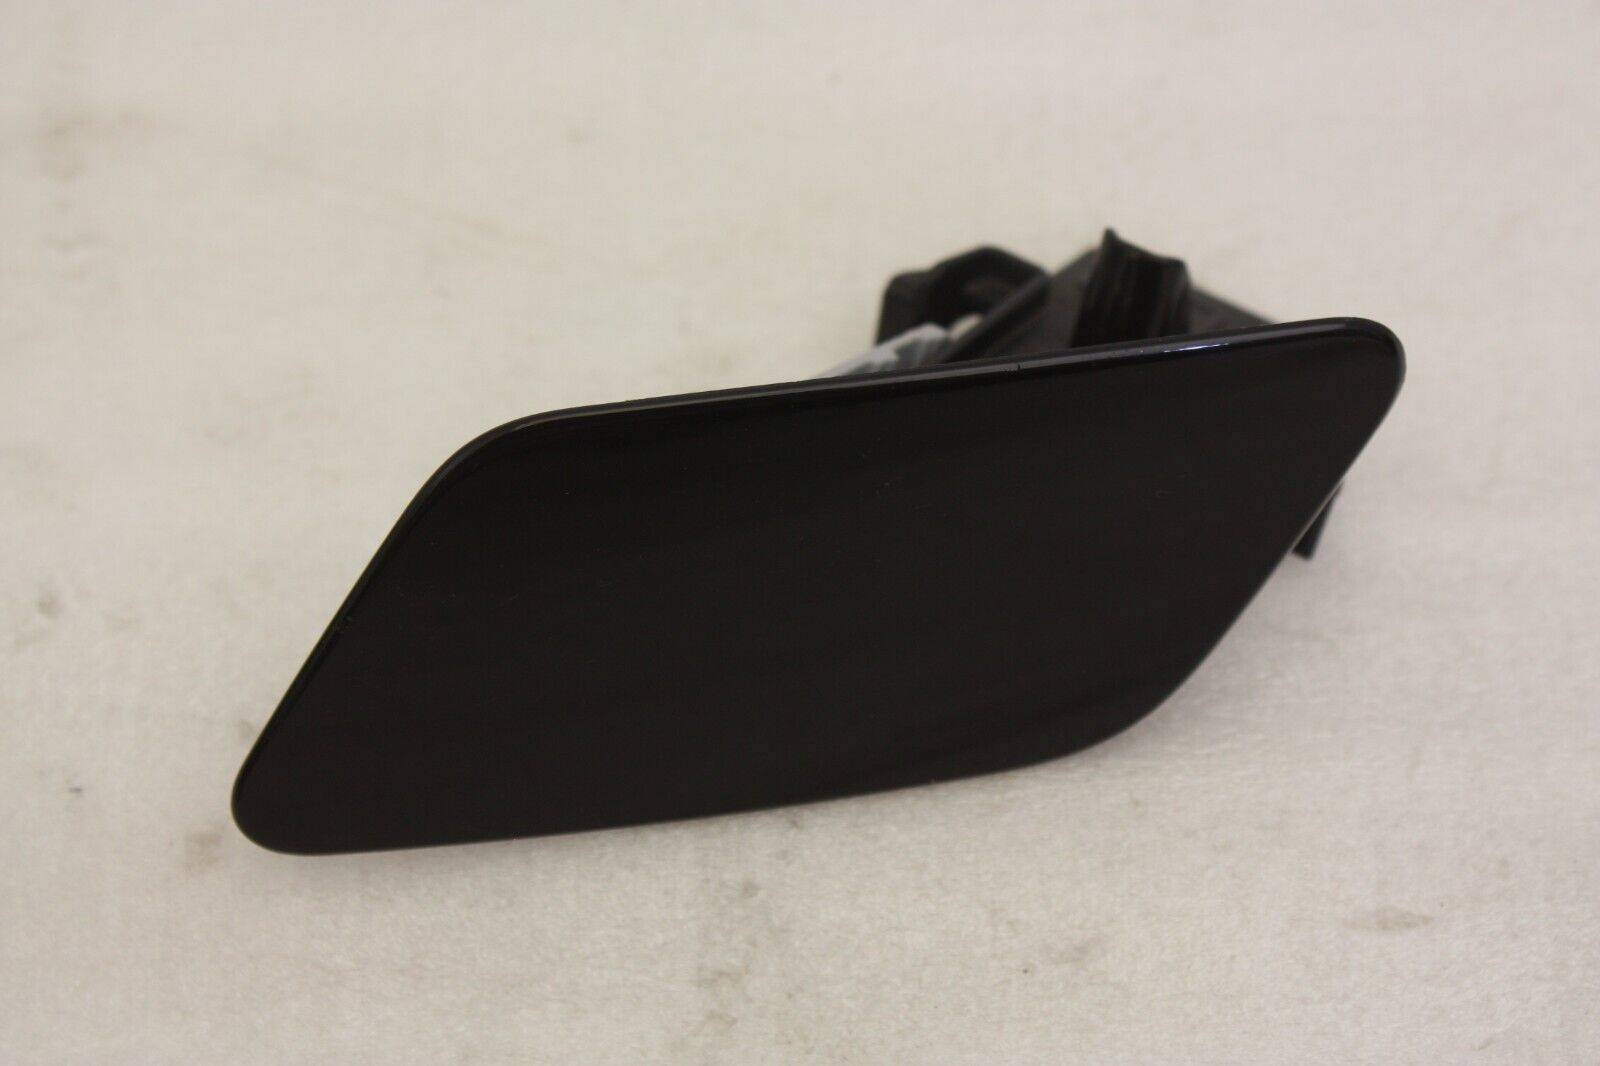 Audi A3 Front Bumper Left Side Washer Cover 8Y0955275 Genuine 176297416238